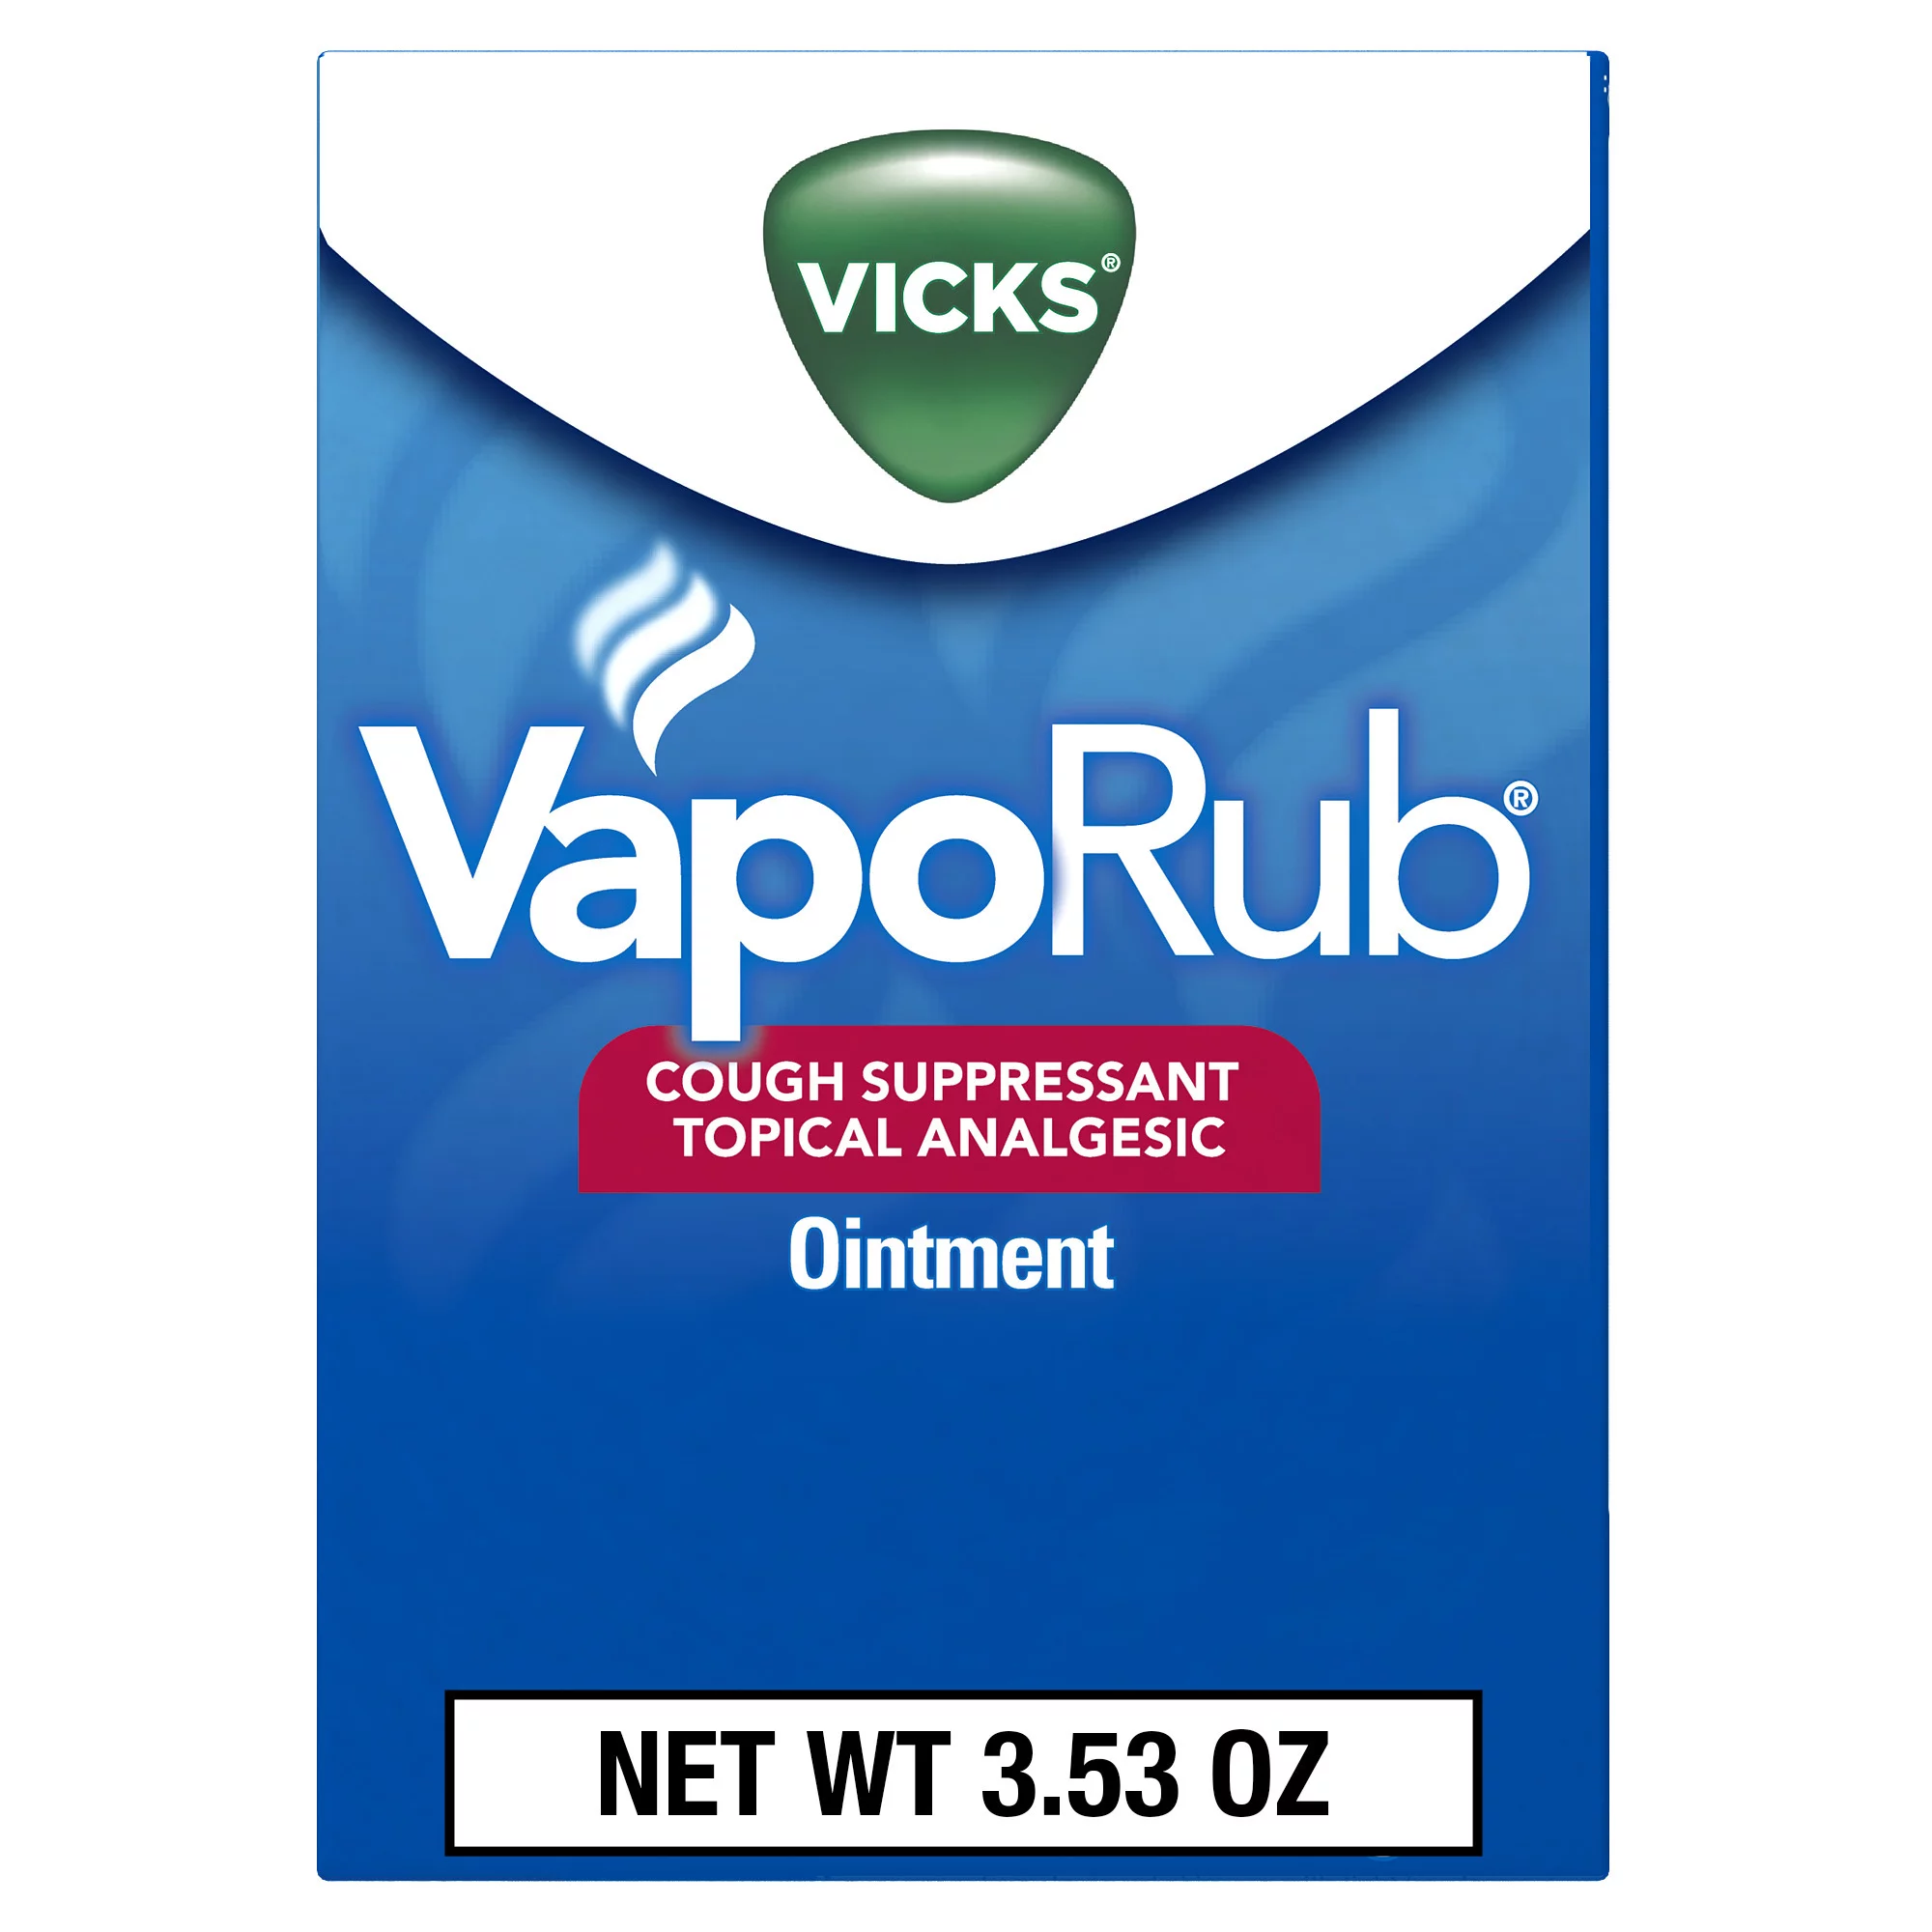 Vicks VapoRub Topical Cough Chest Rub & Analgesic Ointment, over-the-Counter Medicine, 3.53 oz